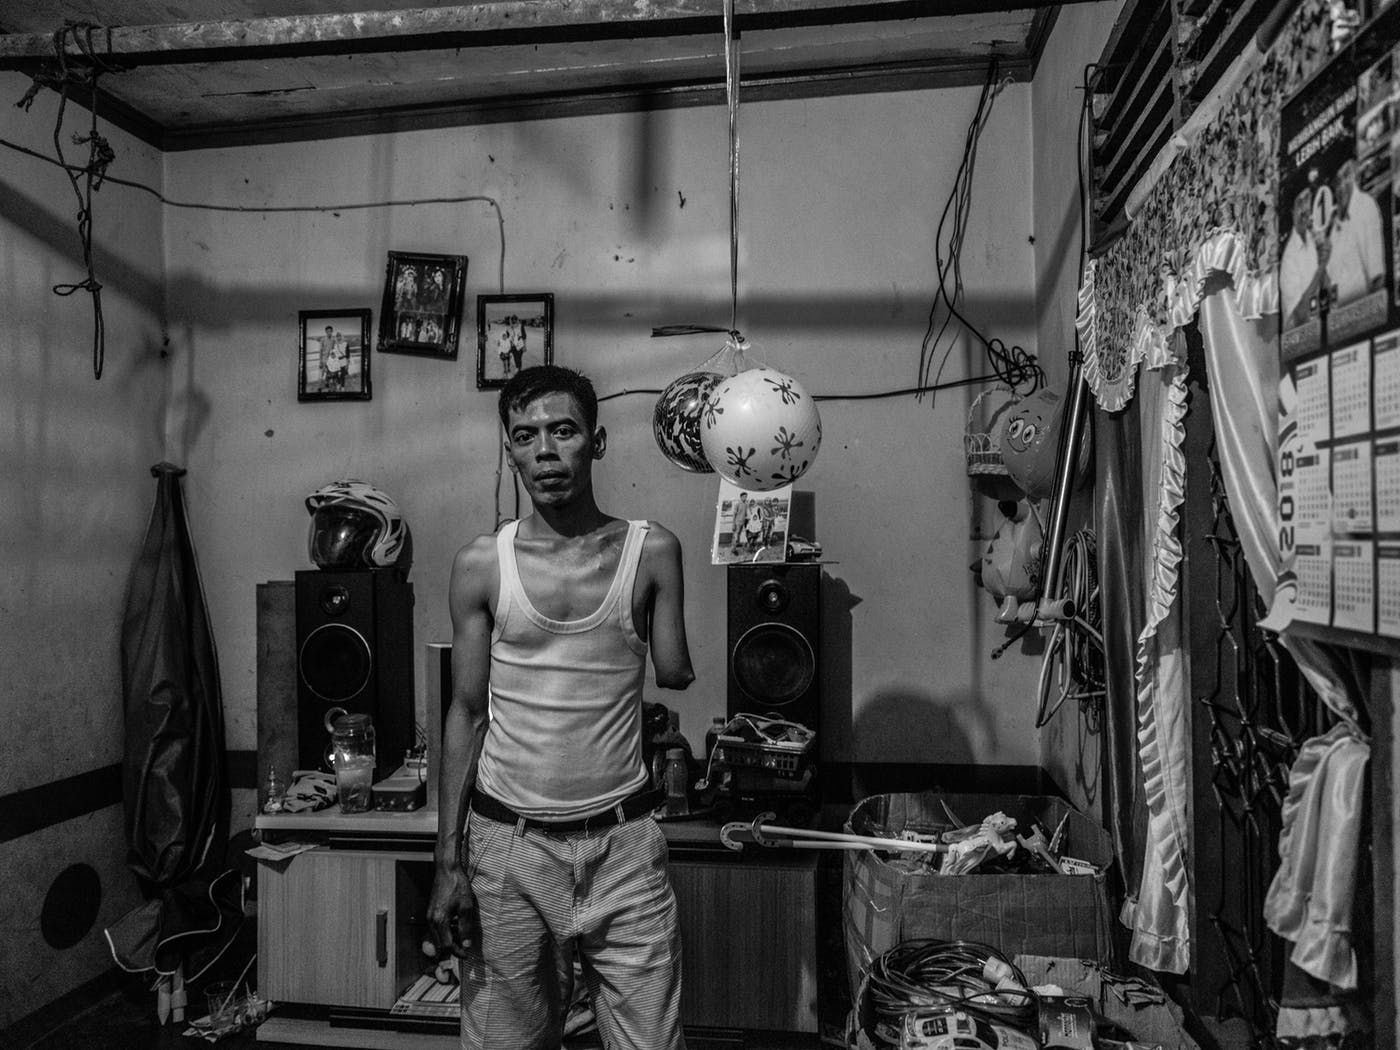 Misnan at home with the toys he sells around the village, which earn him only about $4.75 a week. Image by Xyza Cruz Bacani. Indonesia, 2018.